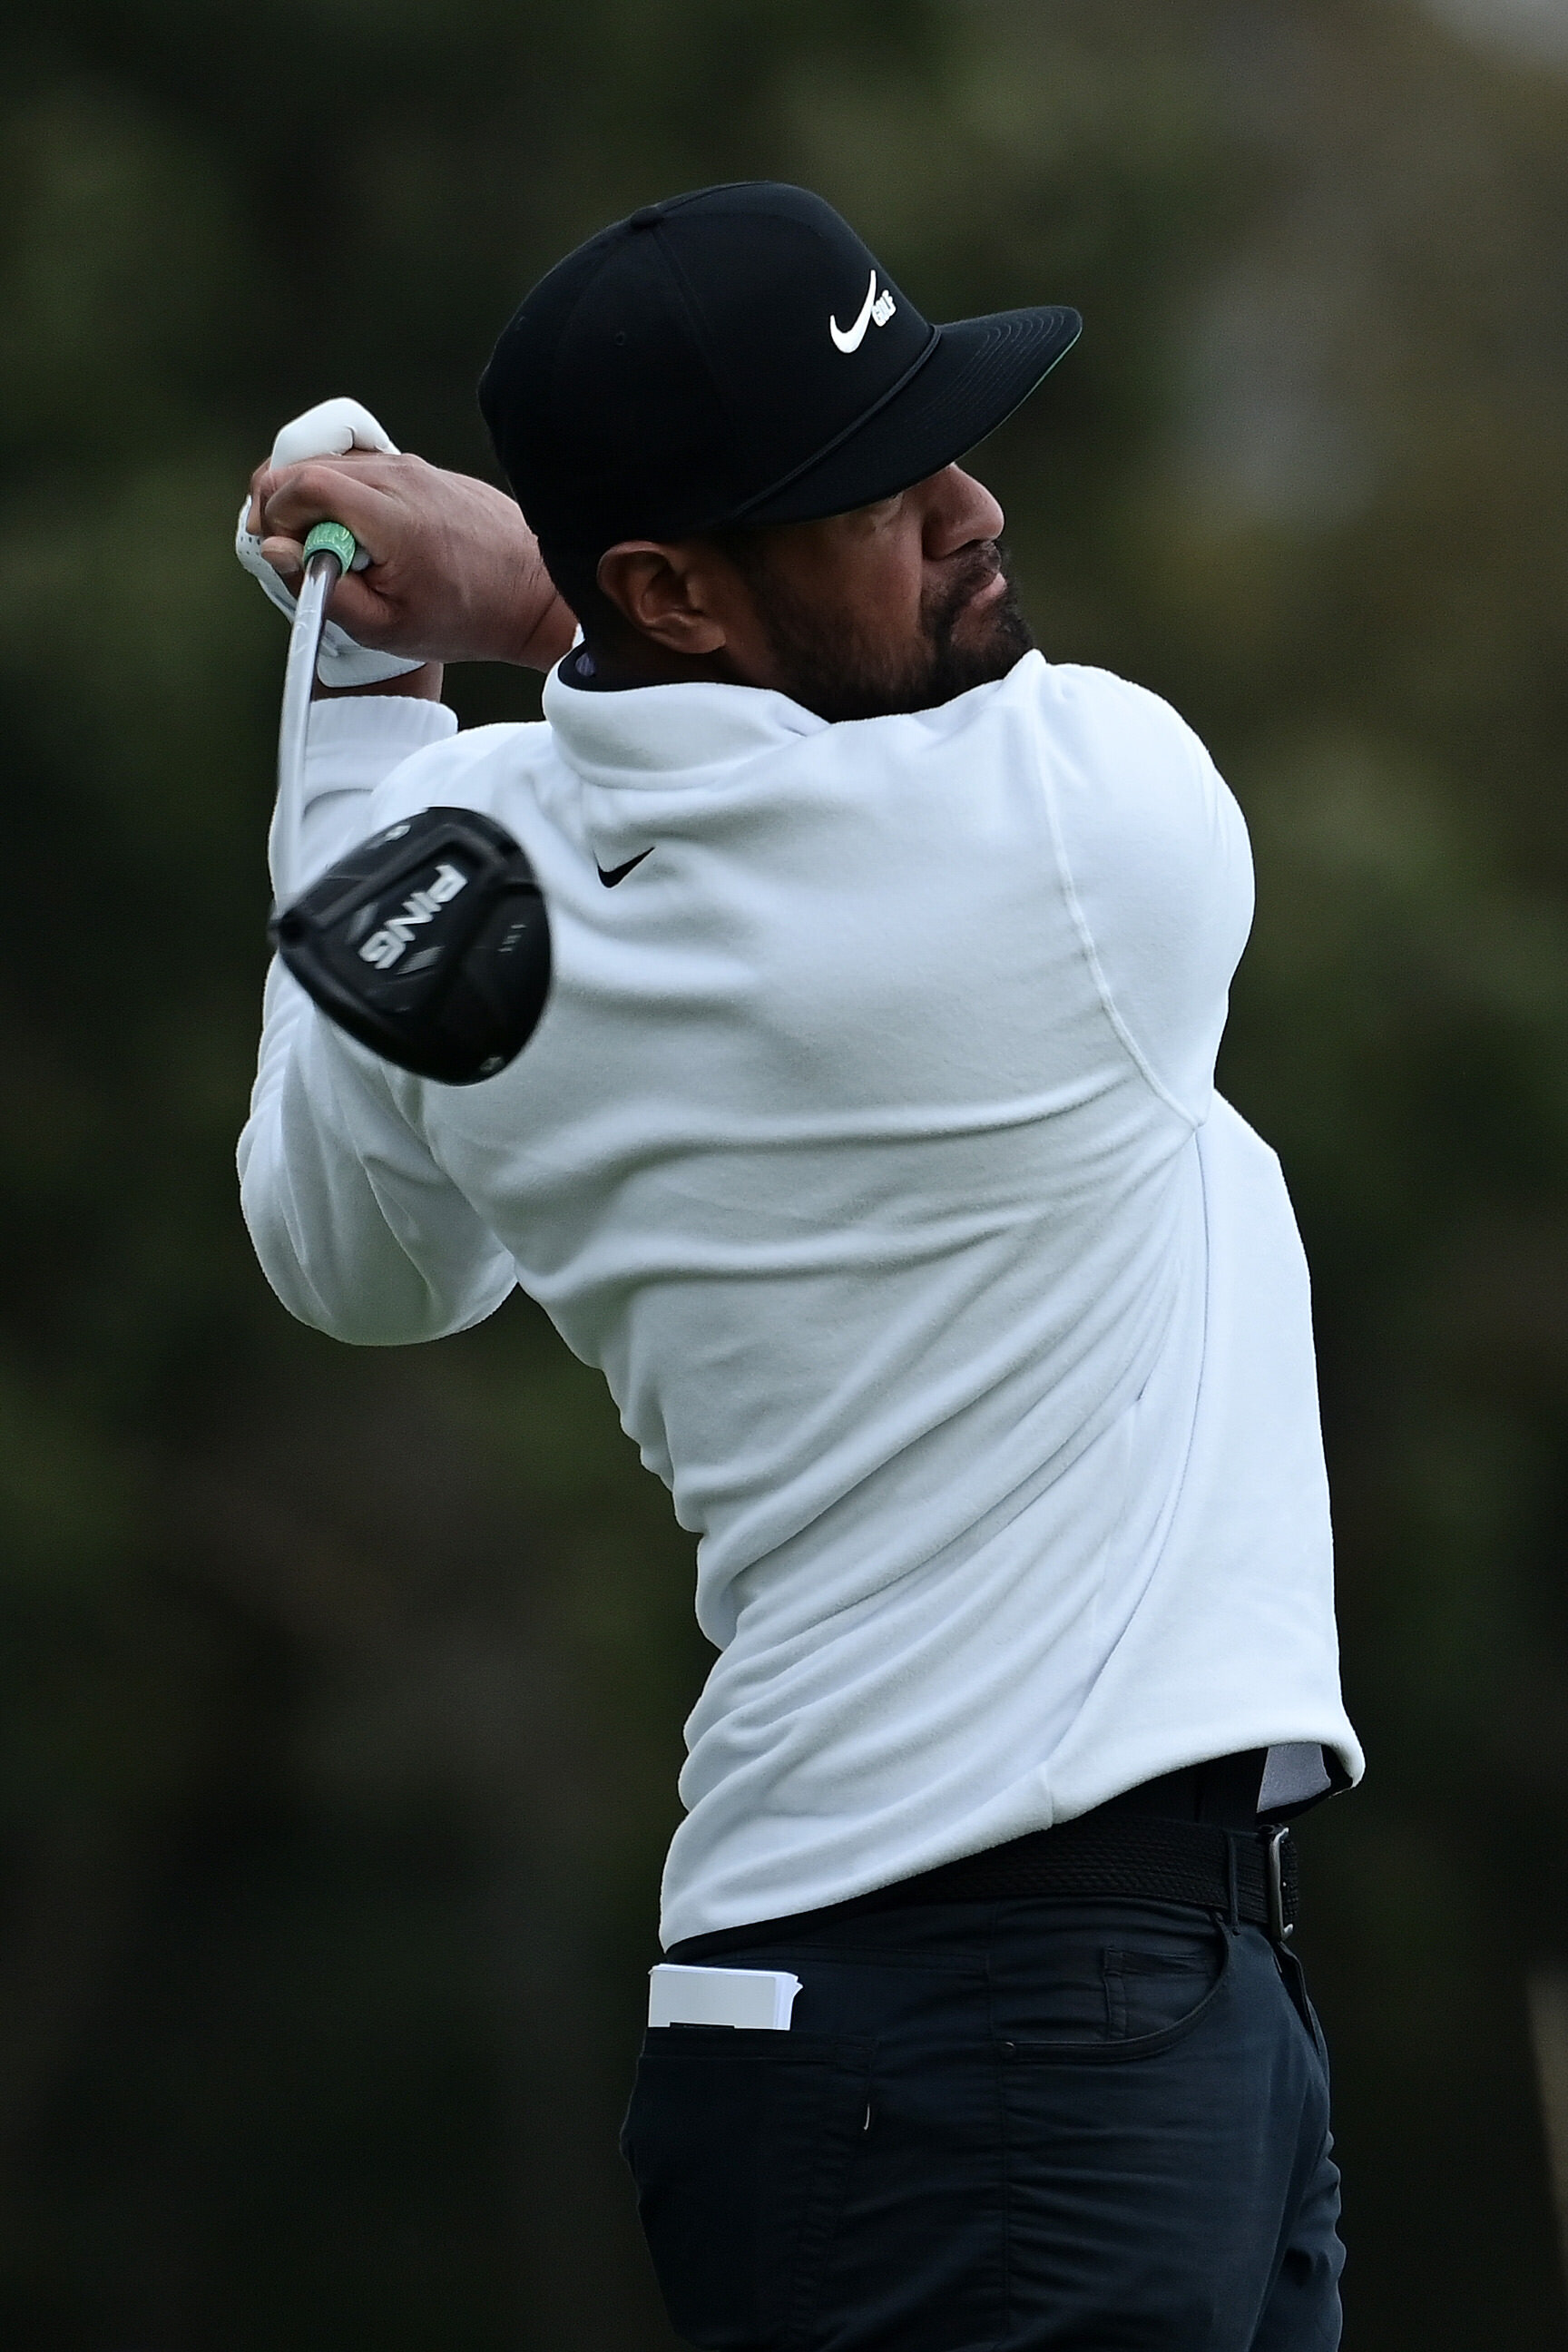  SAN DIEGO, CALIFORNIA - JANUARY 29: Tony Finau hits his tee shot on the 18th hole during round two of the Farmers Insurance Open at Torrey Pines on January 29, 2021 in San Diego, California. (Photo by Donald Miralle/Getty Images) 